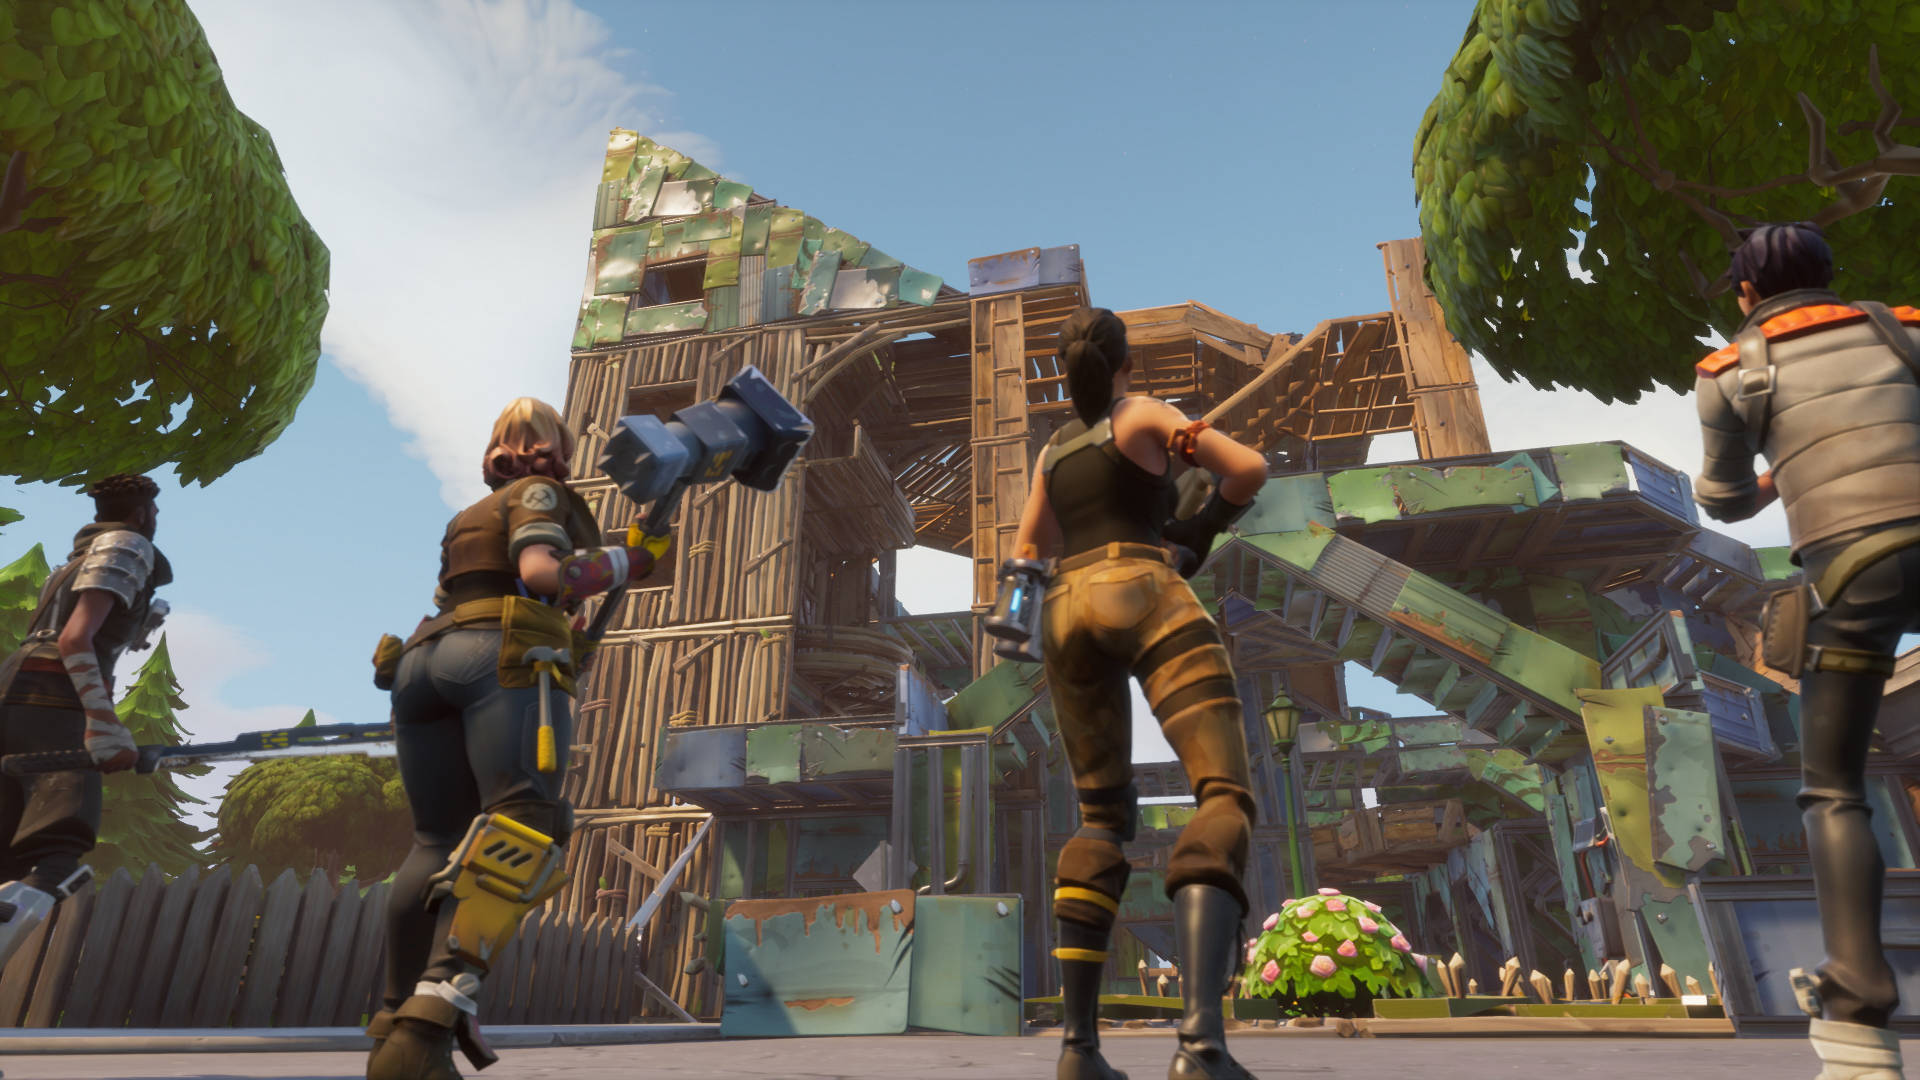 imspeedygonzales has created a practice course for building and editing in fortnite - building course code fortnite